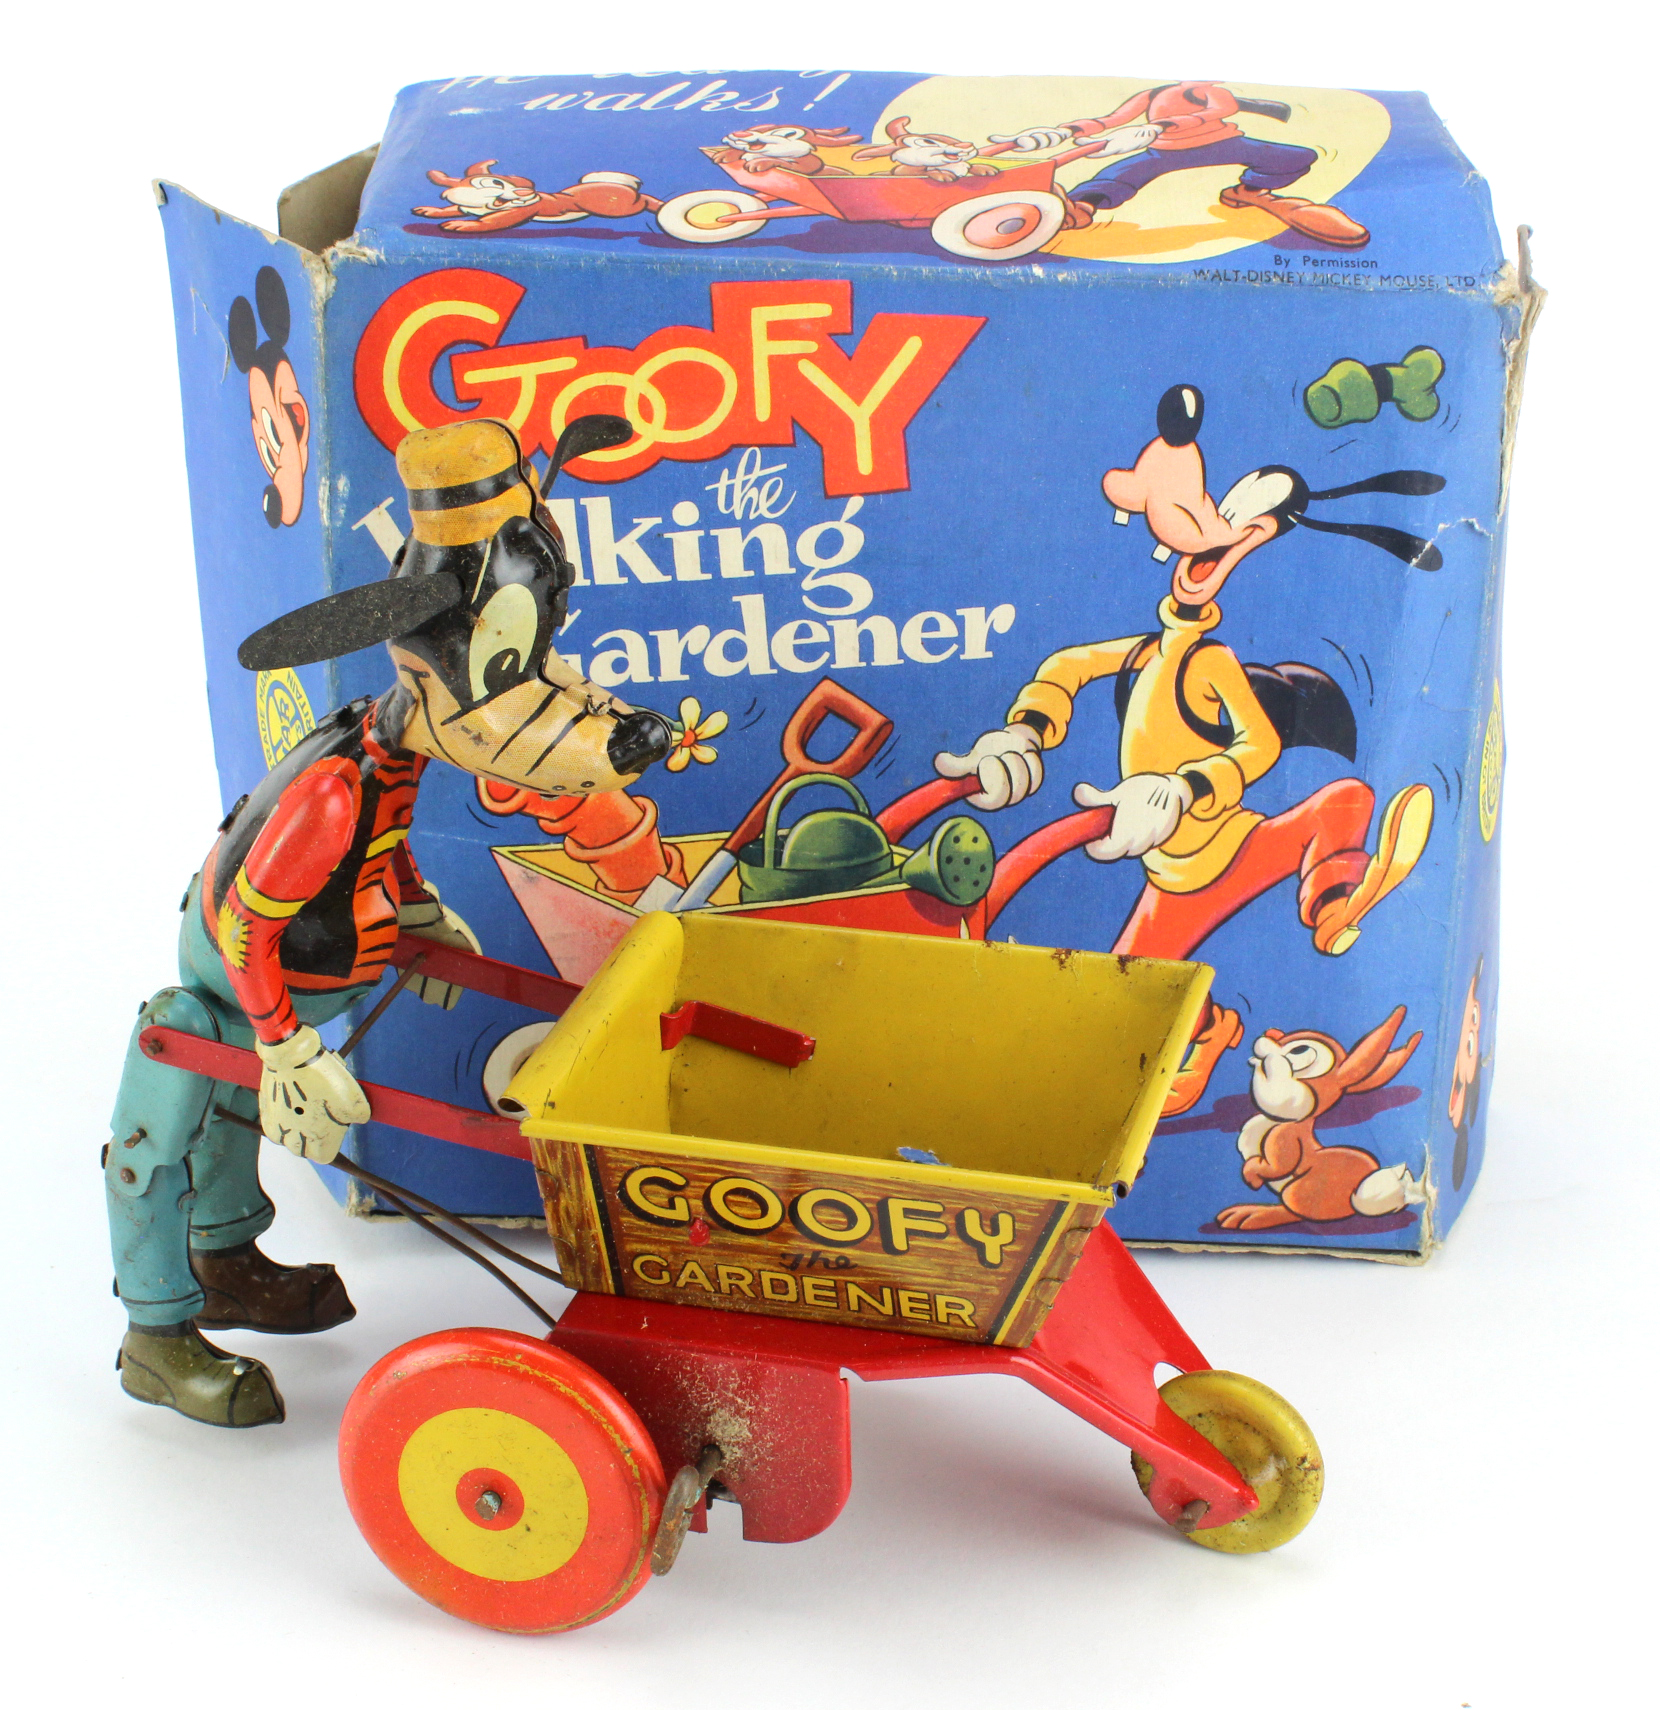 Marx Toys. Goofy the Walking Gardener tinplate toy, not working height 19cm approx., contained in